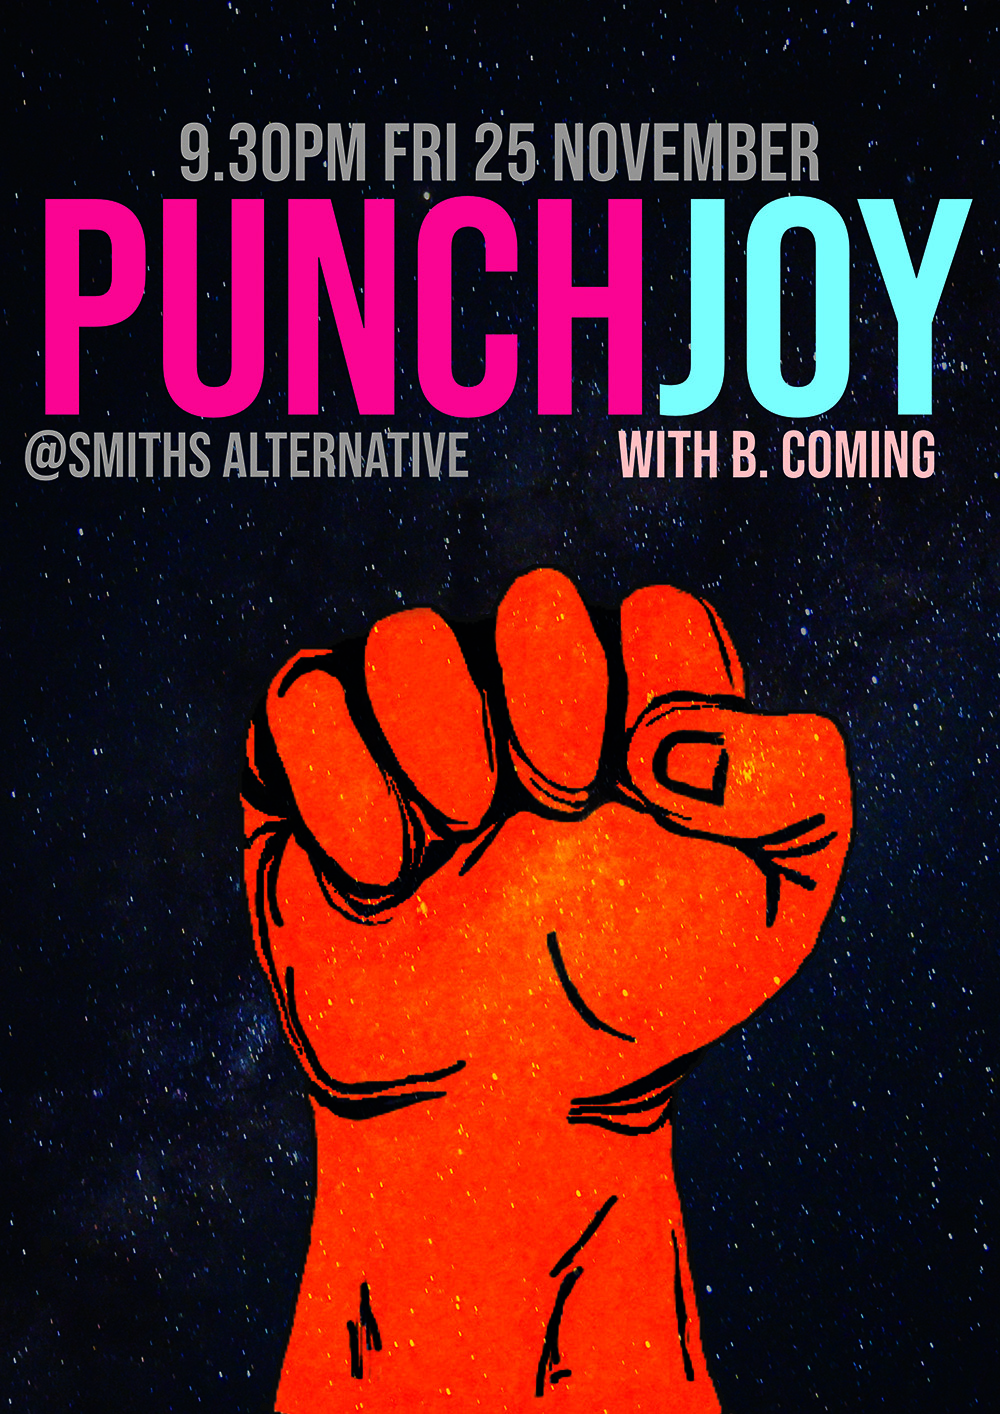 Cancelled PunchJoy